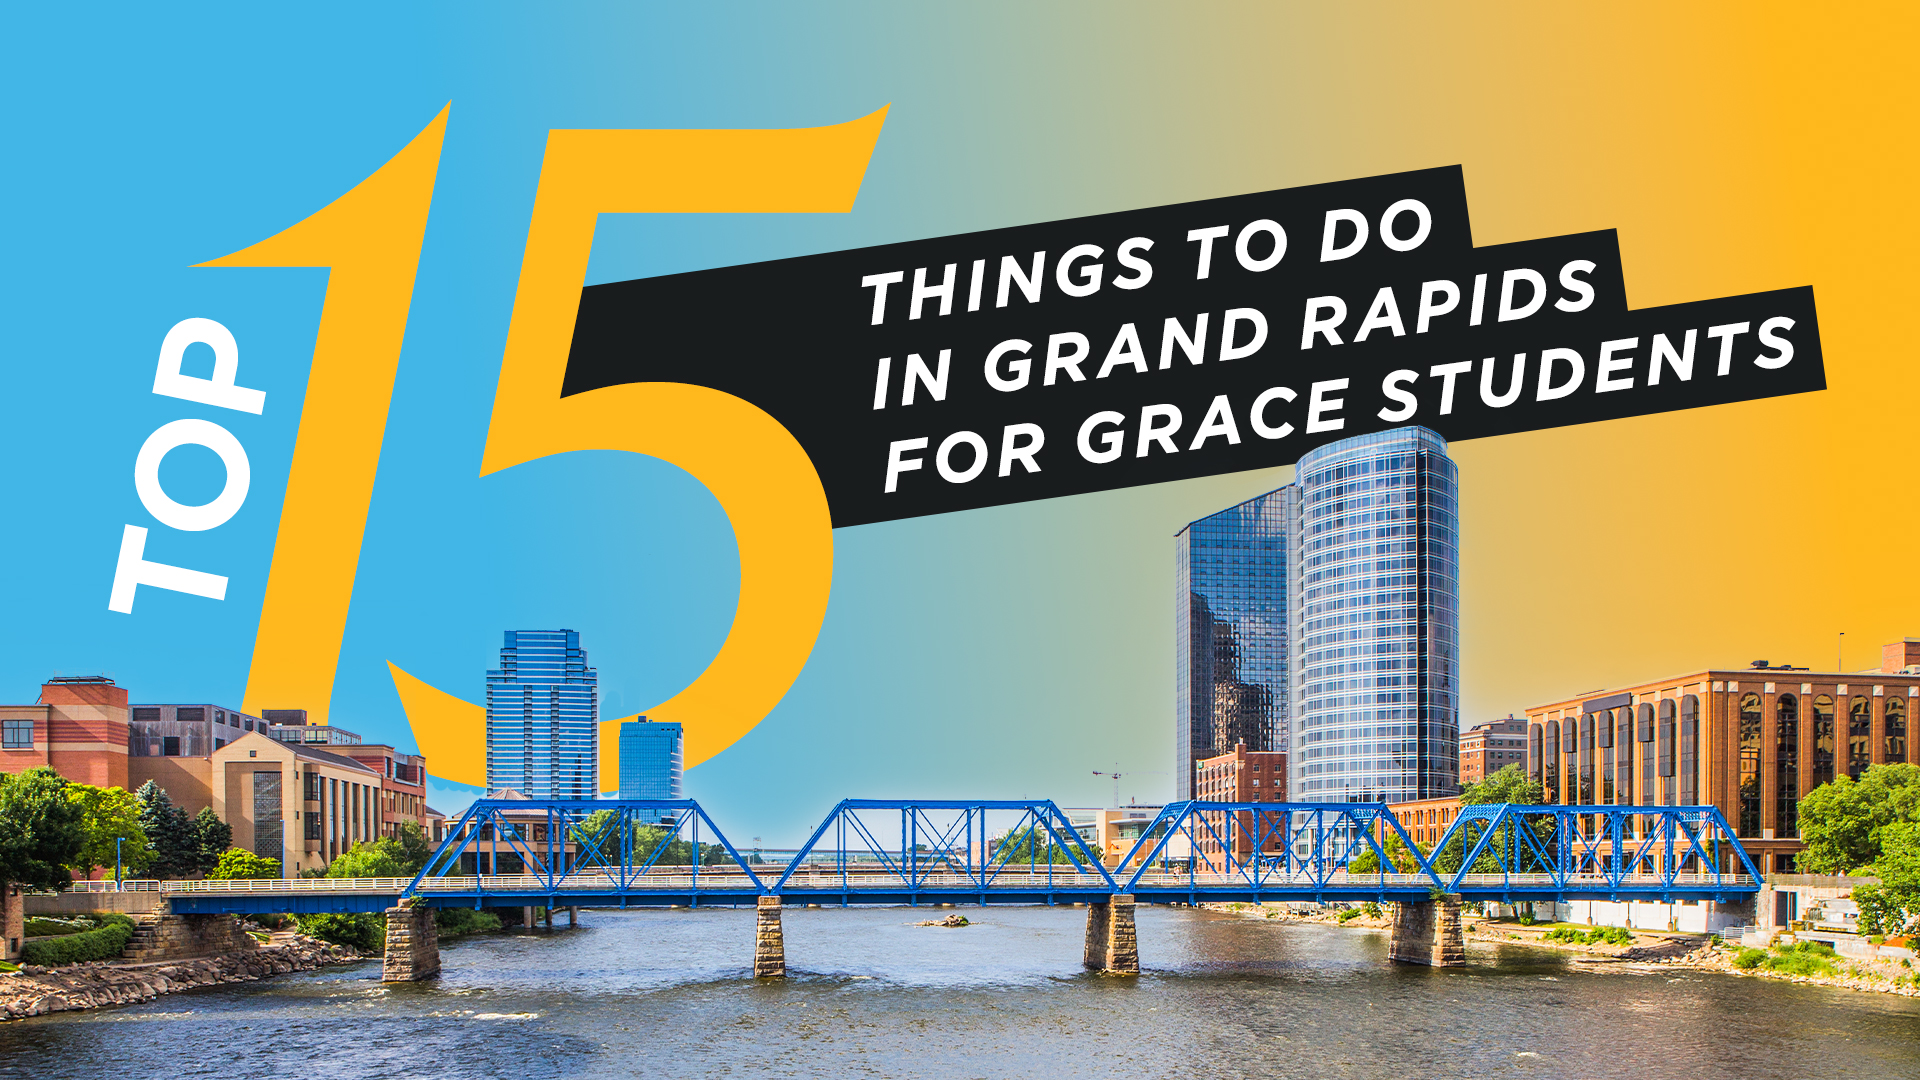 Top 15 Things to Do in Grand Rapids for Grace Students